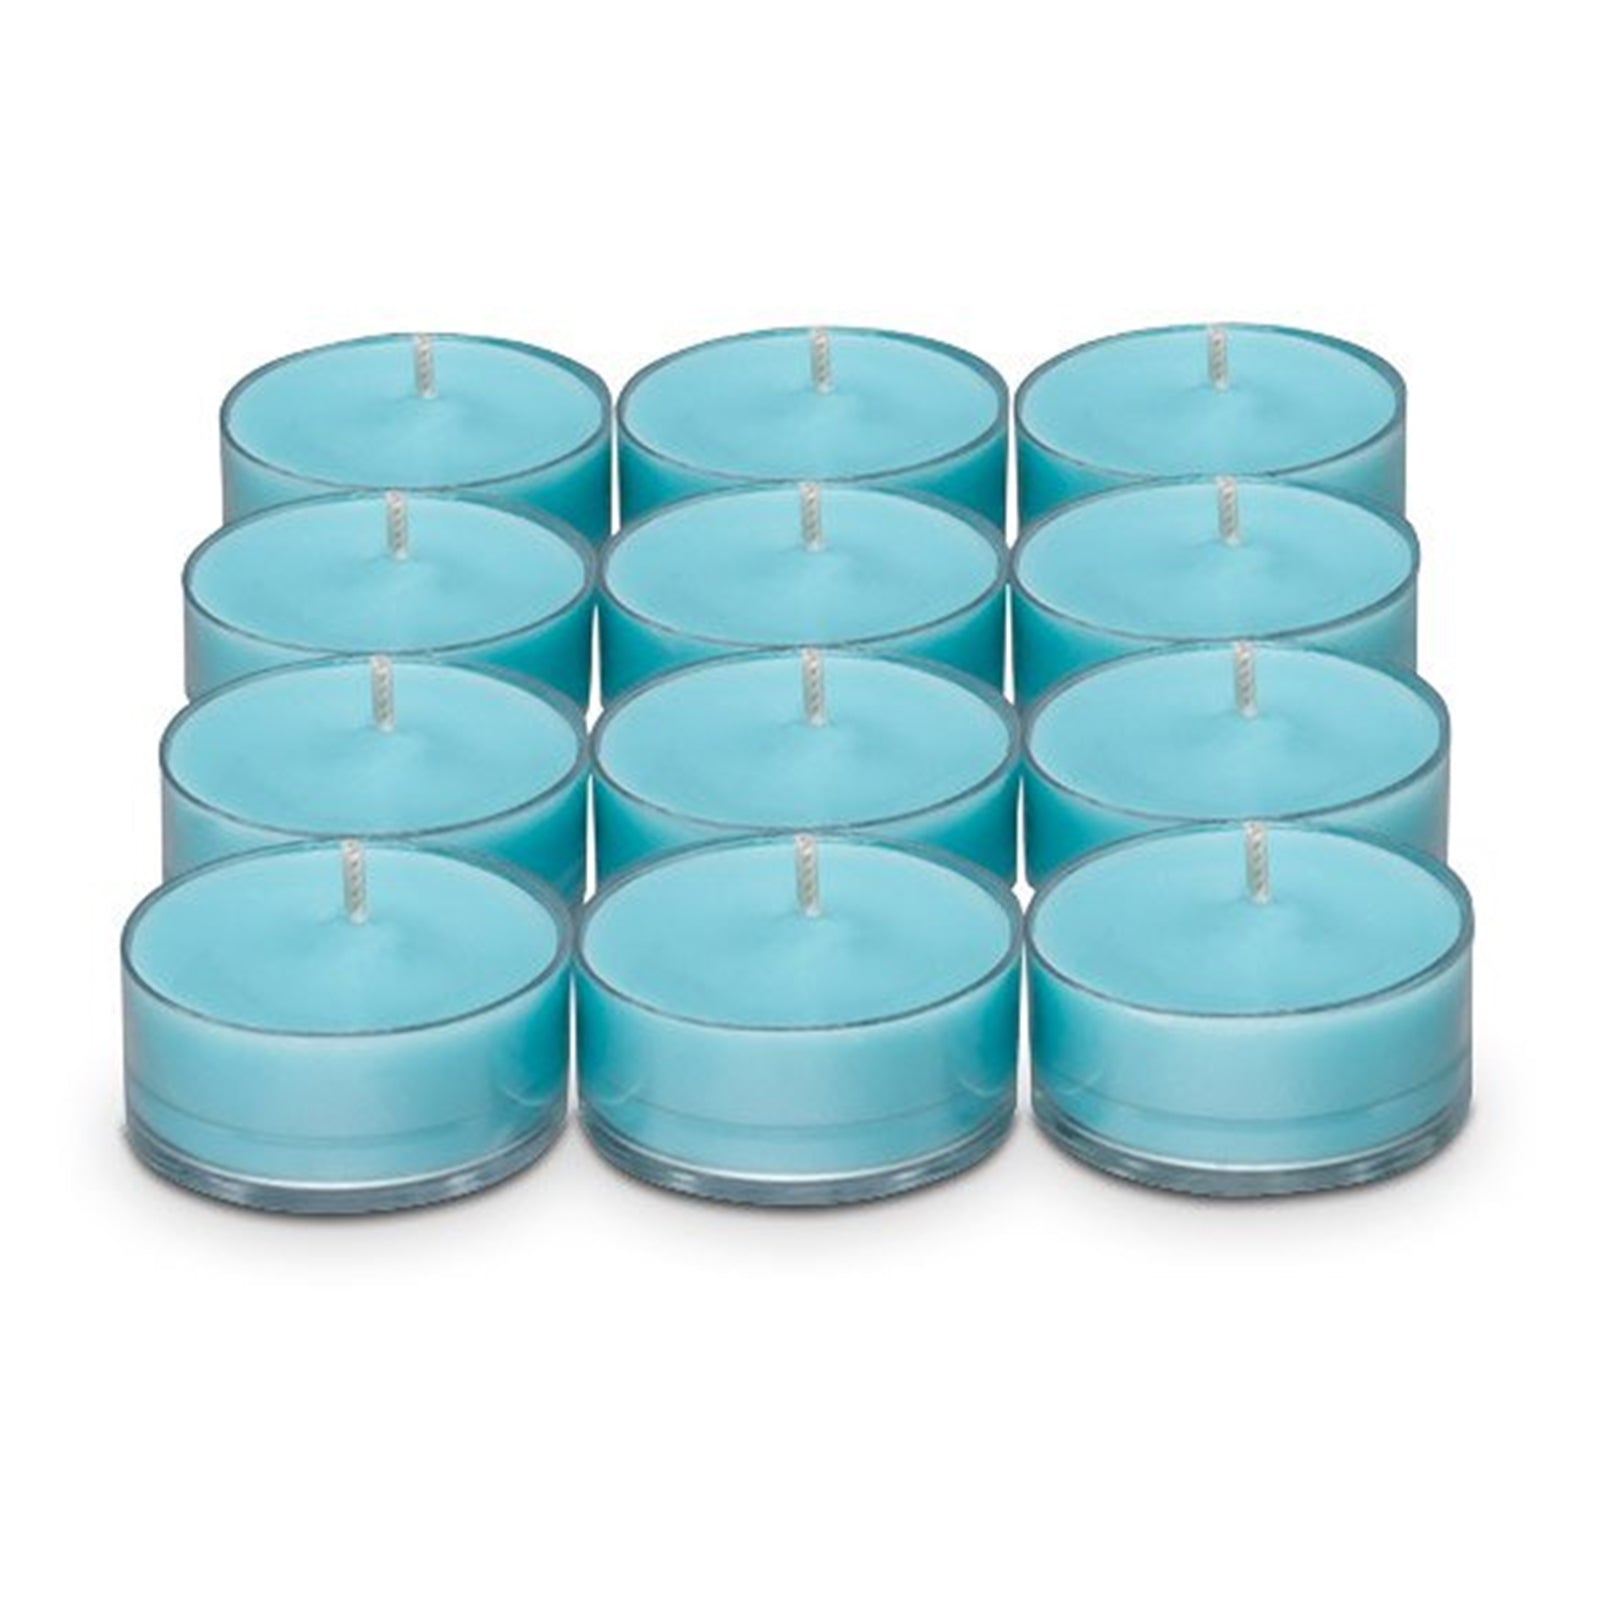 PartyLite Tealight Candles - 1 Box - 1 Dozen Tealights - 12 CANDLES INDIAN BLUE LOTUS & GINGER